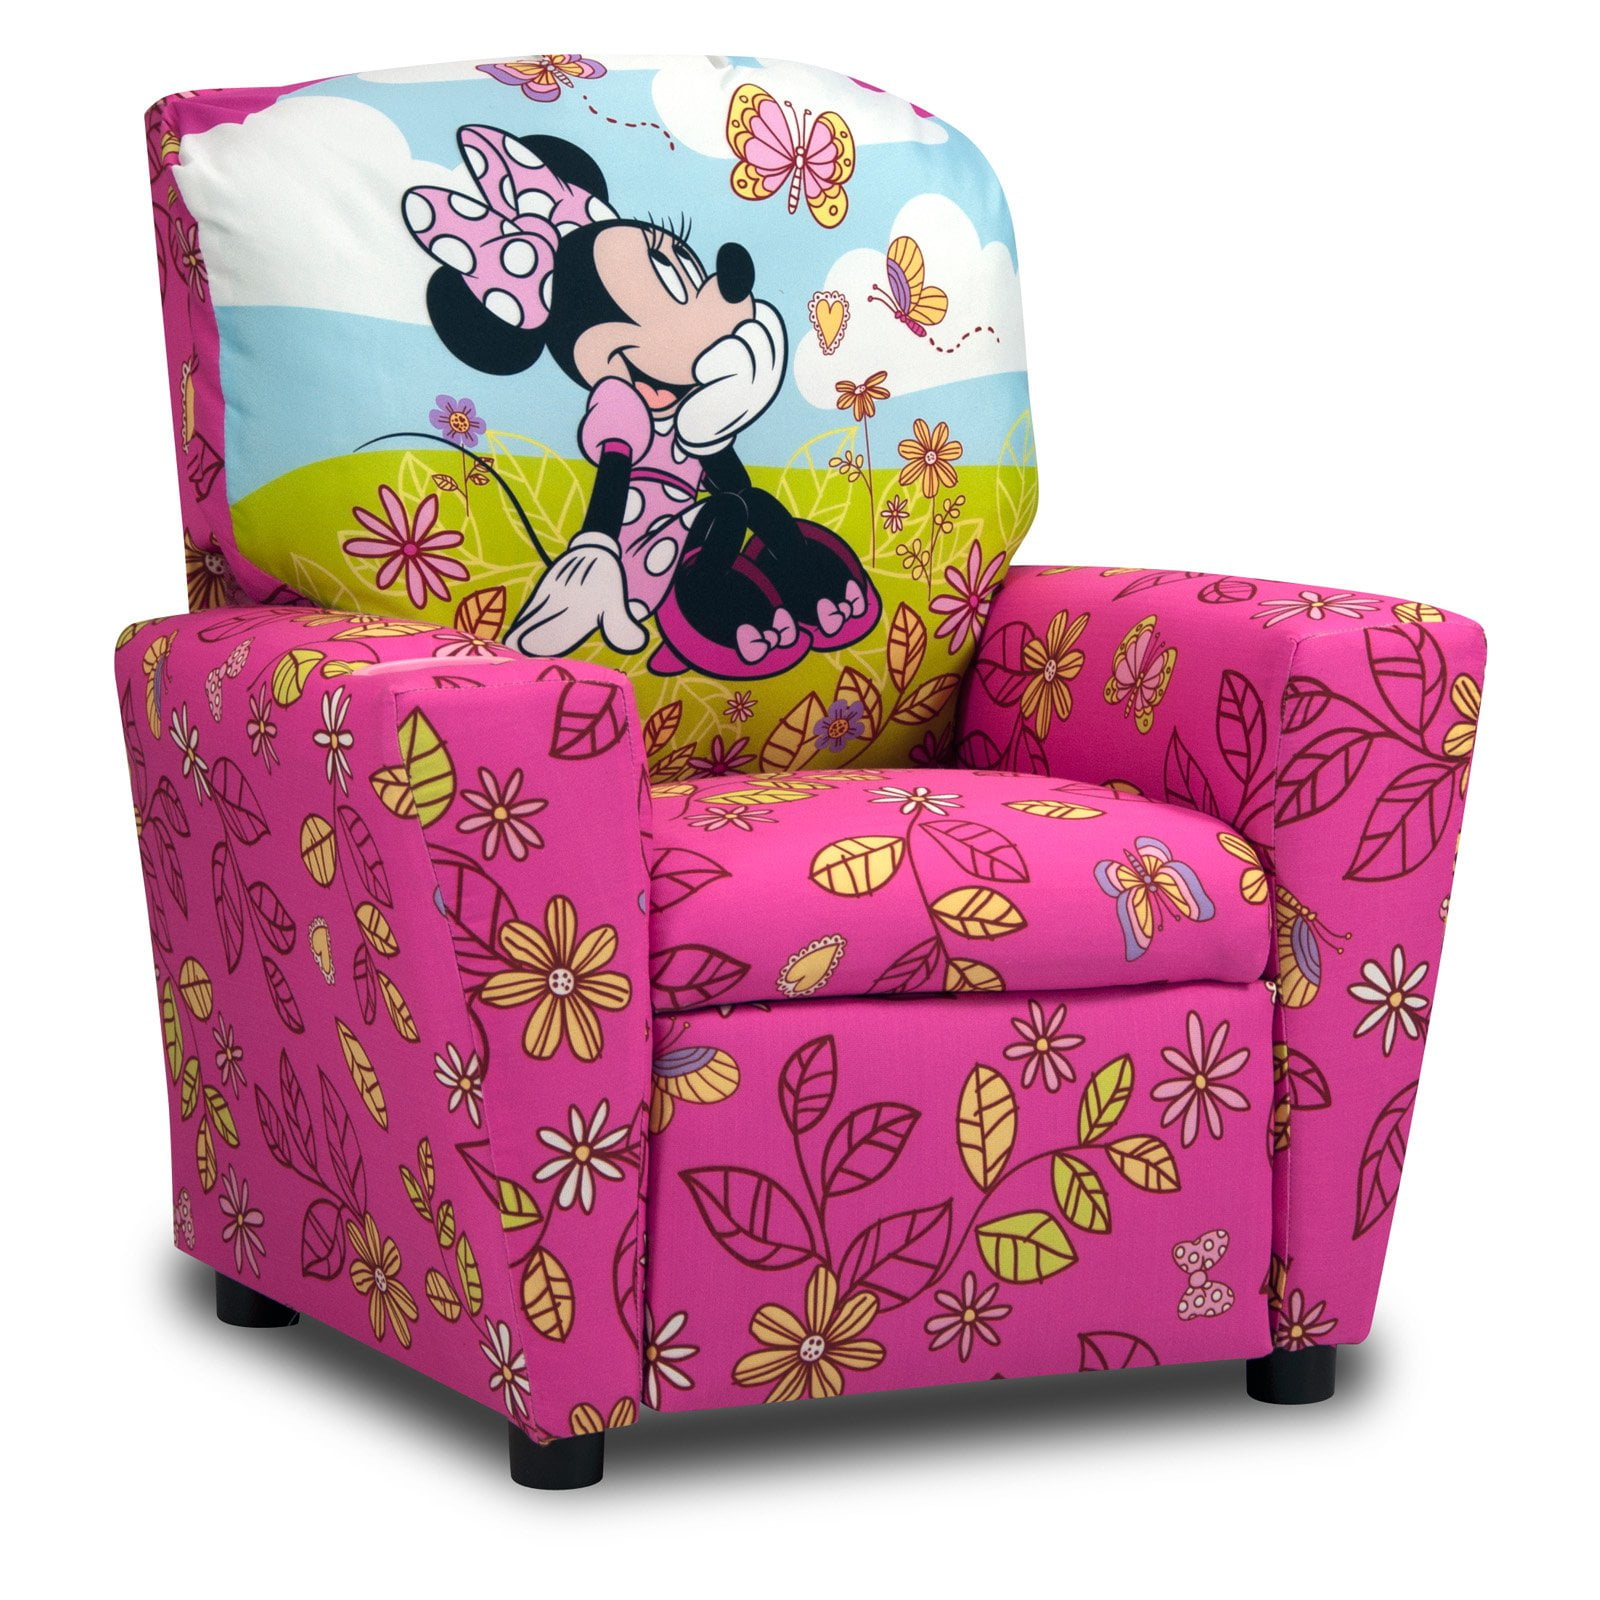 pink camo recliner for toddlers